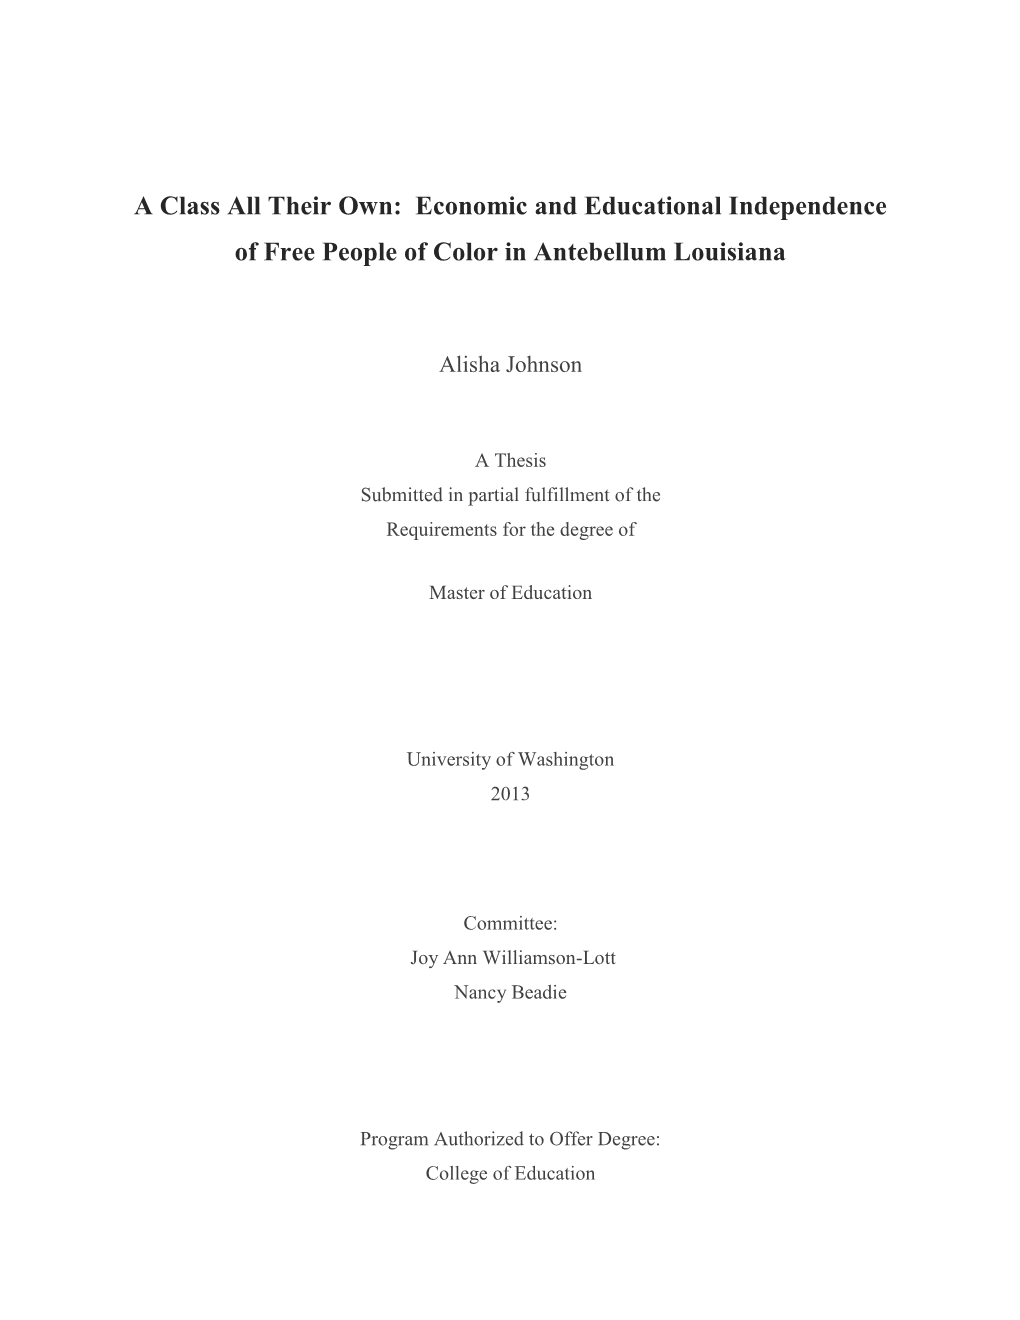 Economic and Educational Independence of Free People of Color in Antebellum Louisiana